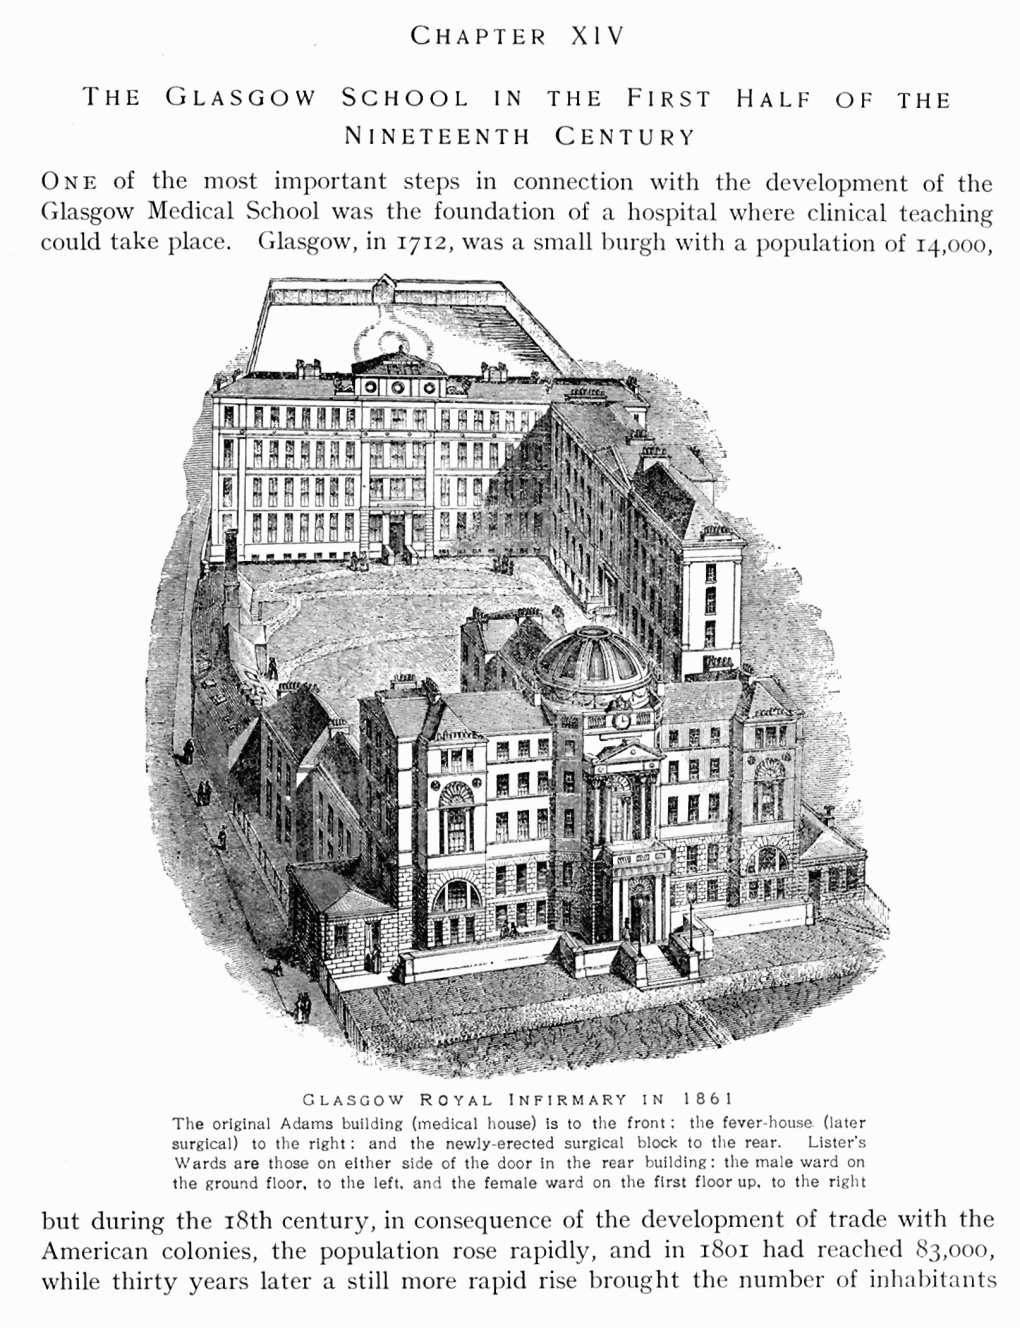 The Glasgow School in the First Half of the Nineteenth Century 219